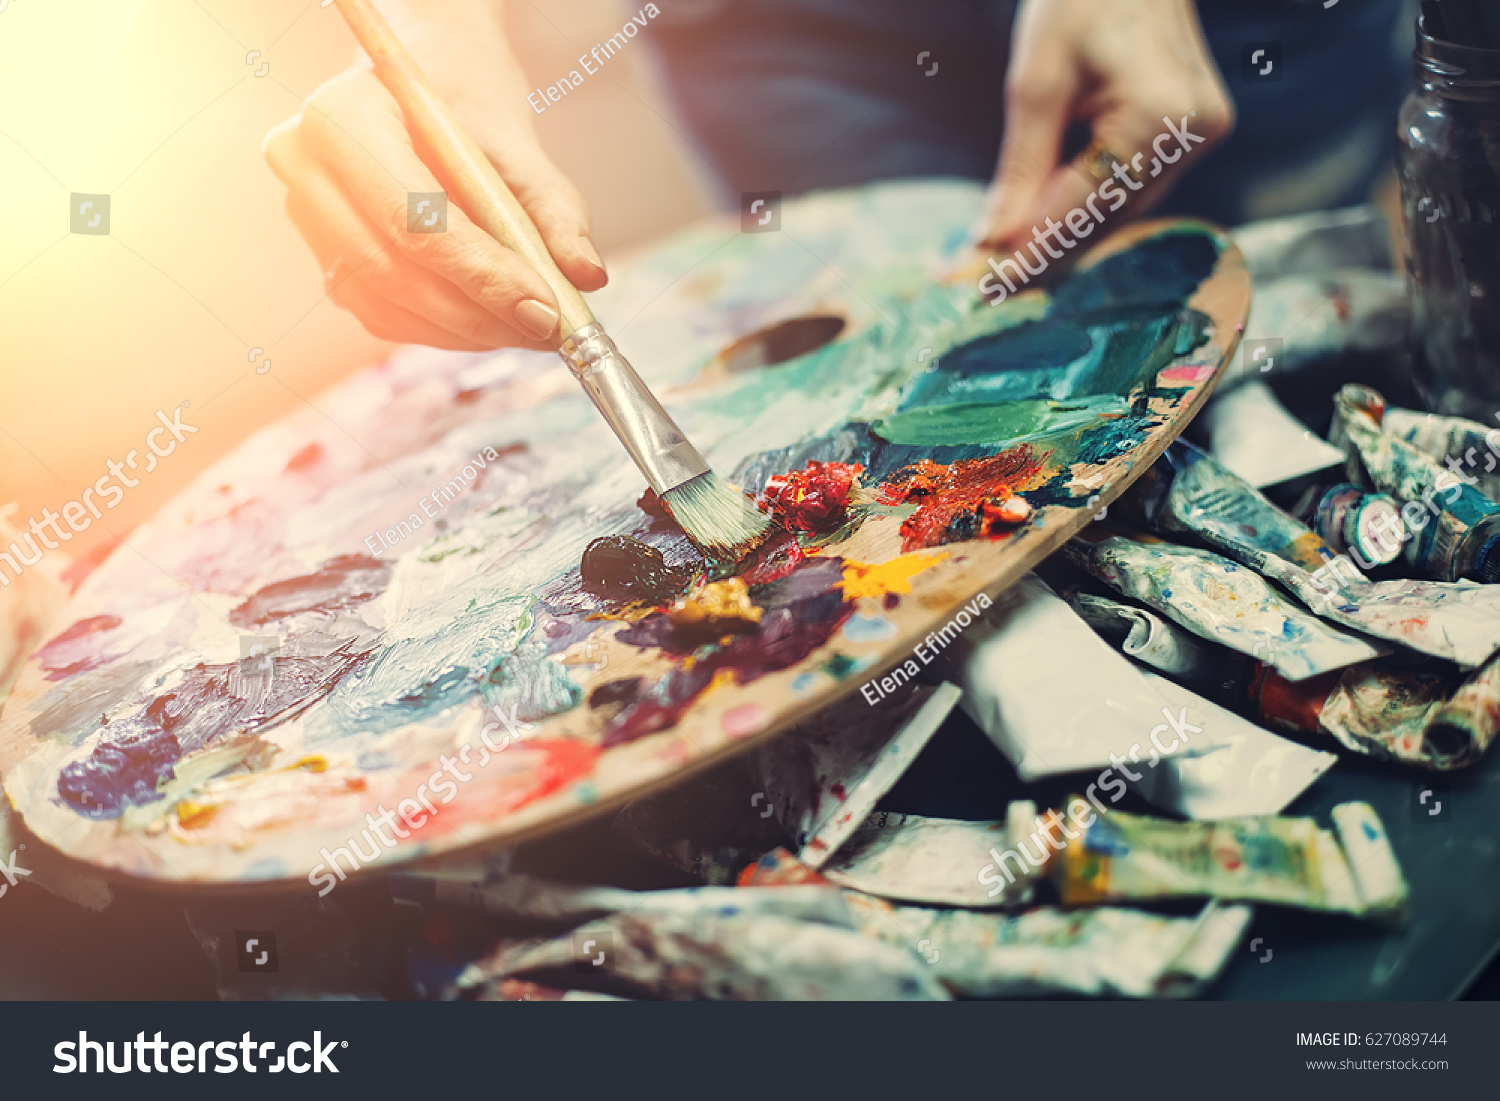 Artist's palette, close-up. Selective focus on the foreground. Background image. #627089744